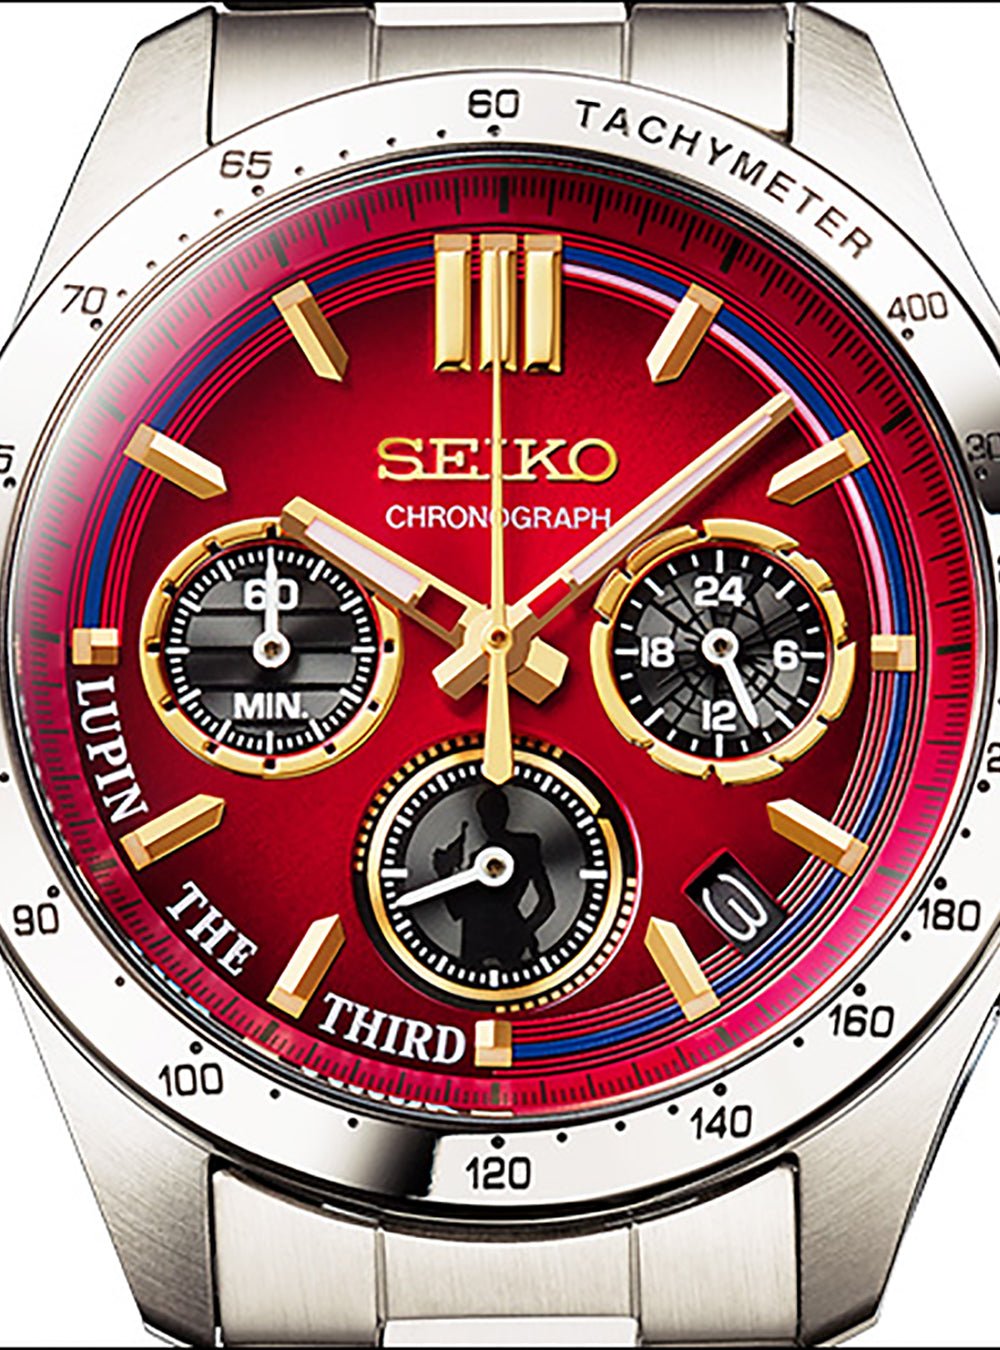 SEIKO x LUPIN THE THIRD COLLABORATION WATCH LIMITED EDITION MADE IN JAPANWRISTWATCHjapan-select